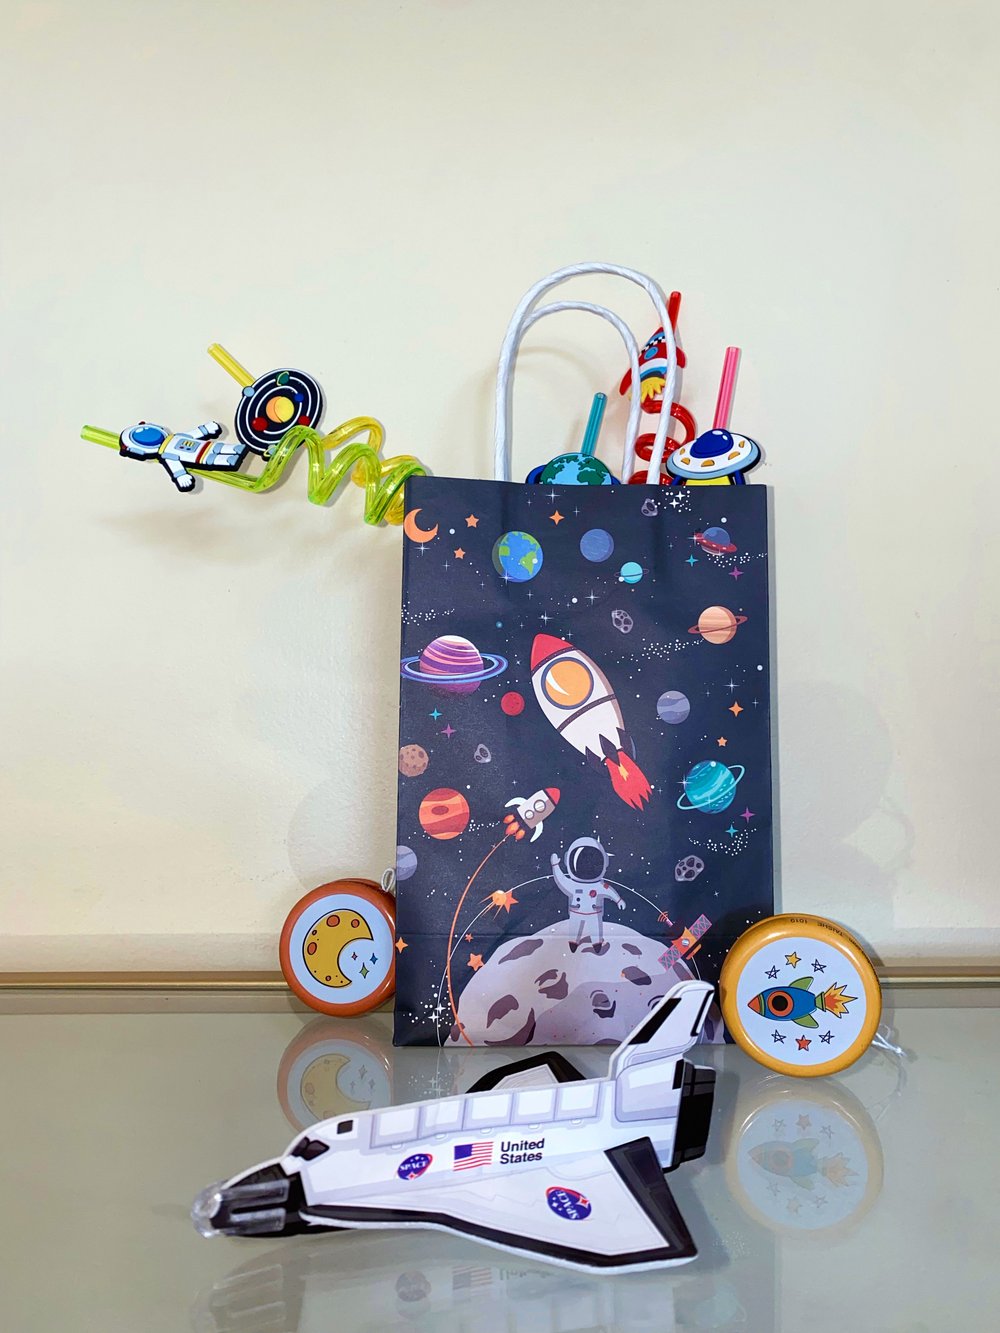 space silly straws | outer space goodie bags | space goodie bag | out of this world party | space birthday ideas | birthday party ideas boys | kids birthday party ideas | anajacqueline.com